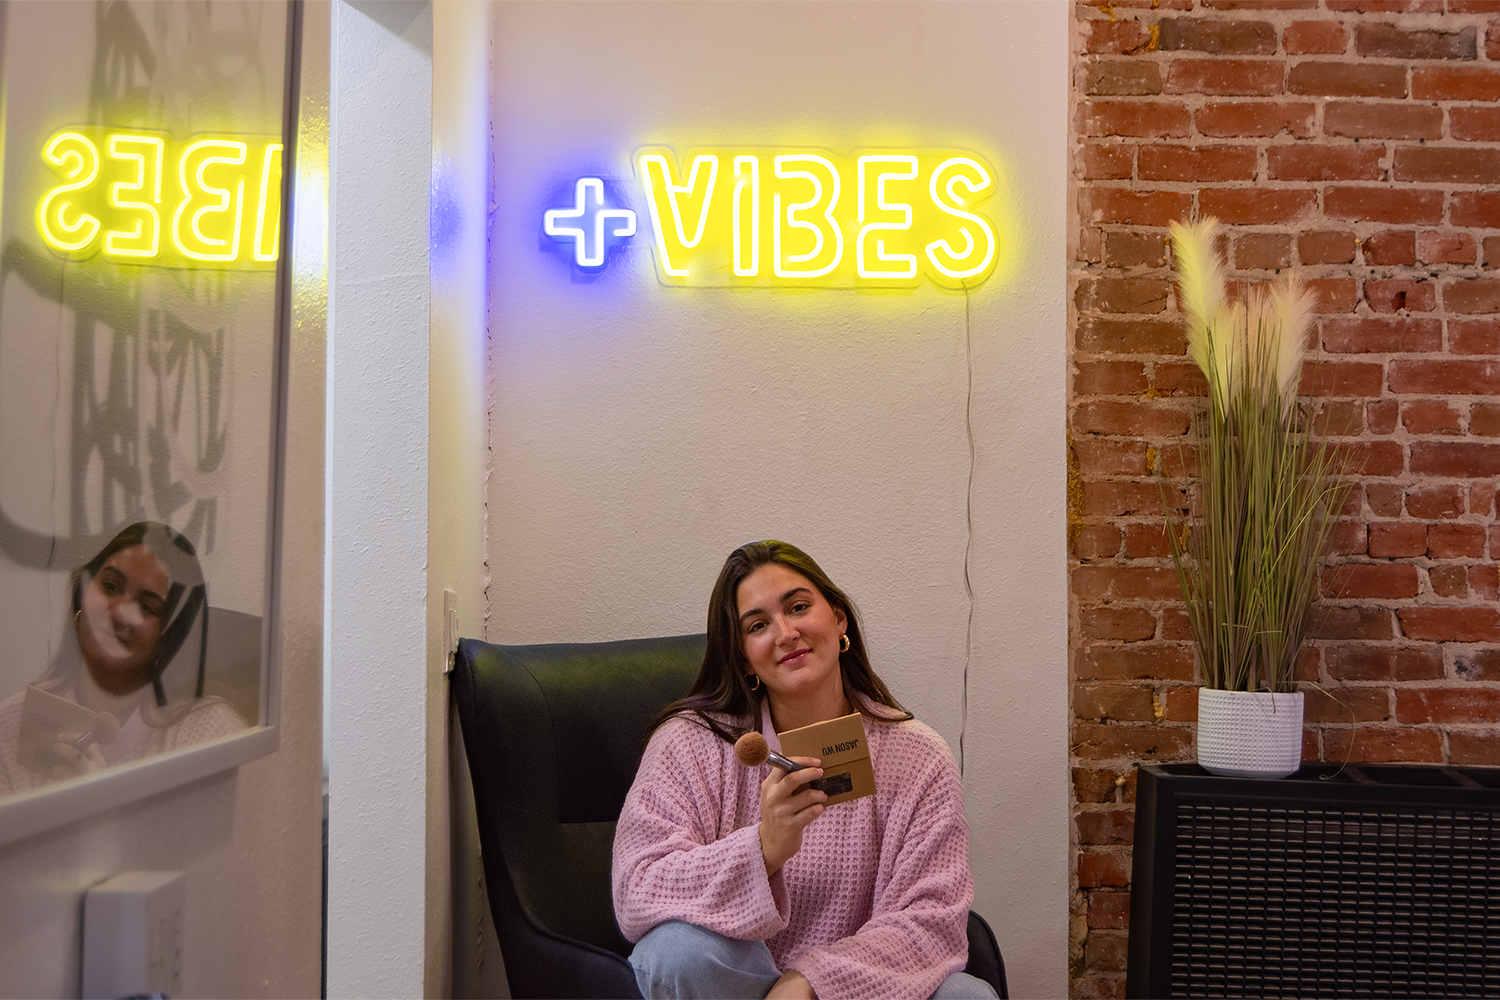 A girl sitting in a chair under a neon sign that says "positive vibes".